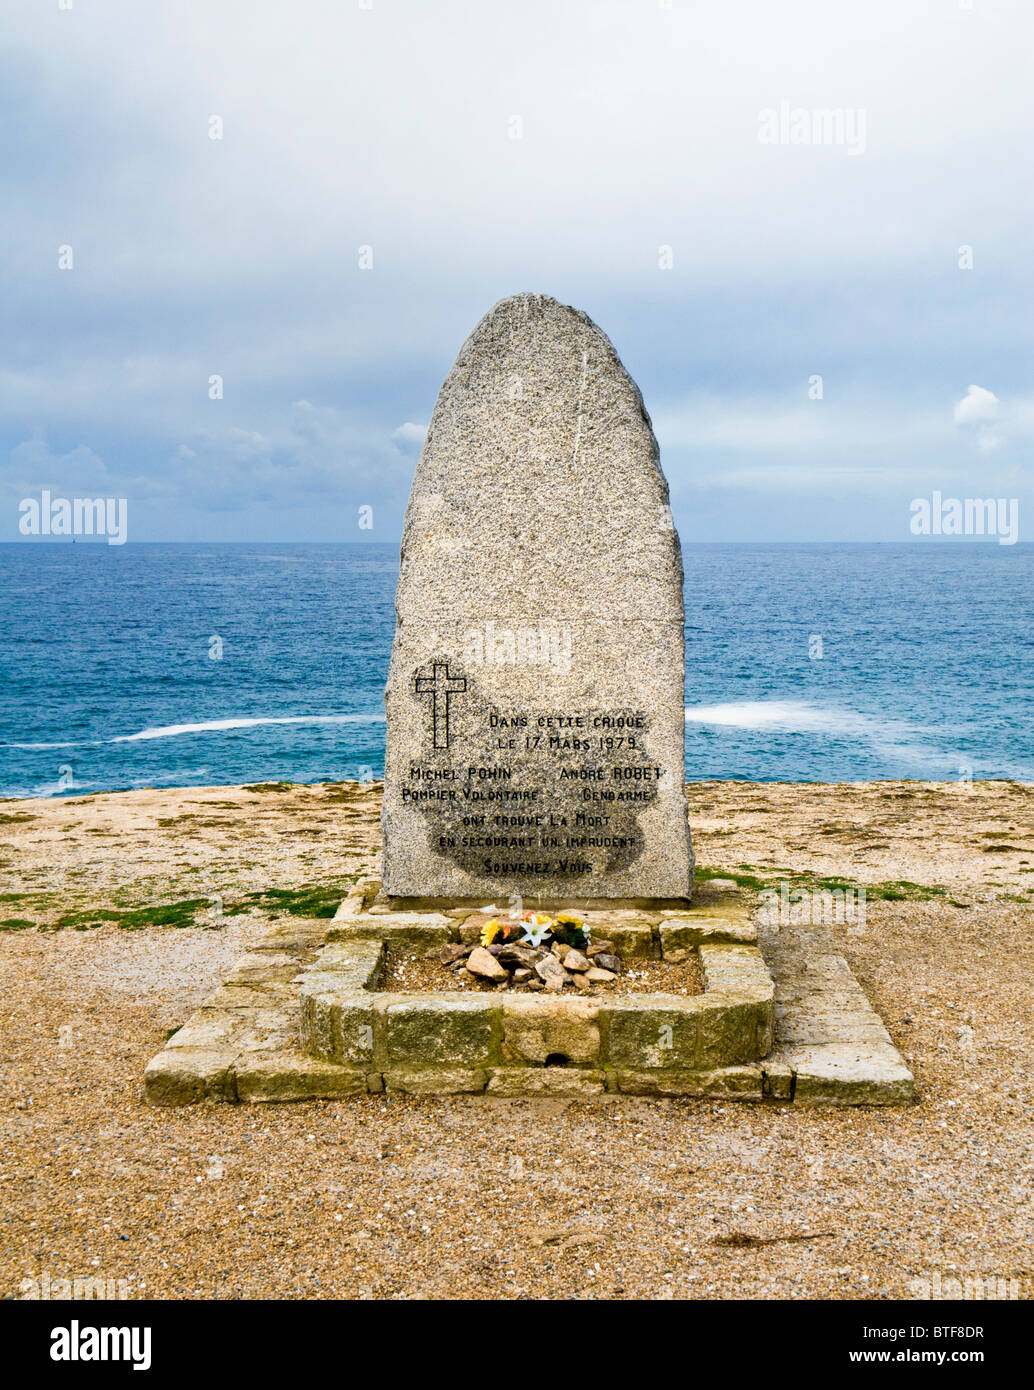 Memorial to people drowned off the coast on the Cote Sauvage, Morbihan, Brittany, France Europe Stock Photo